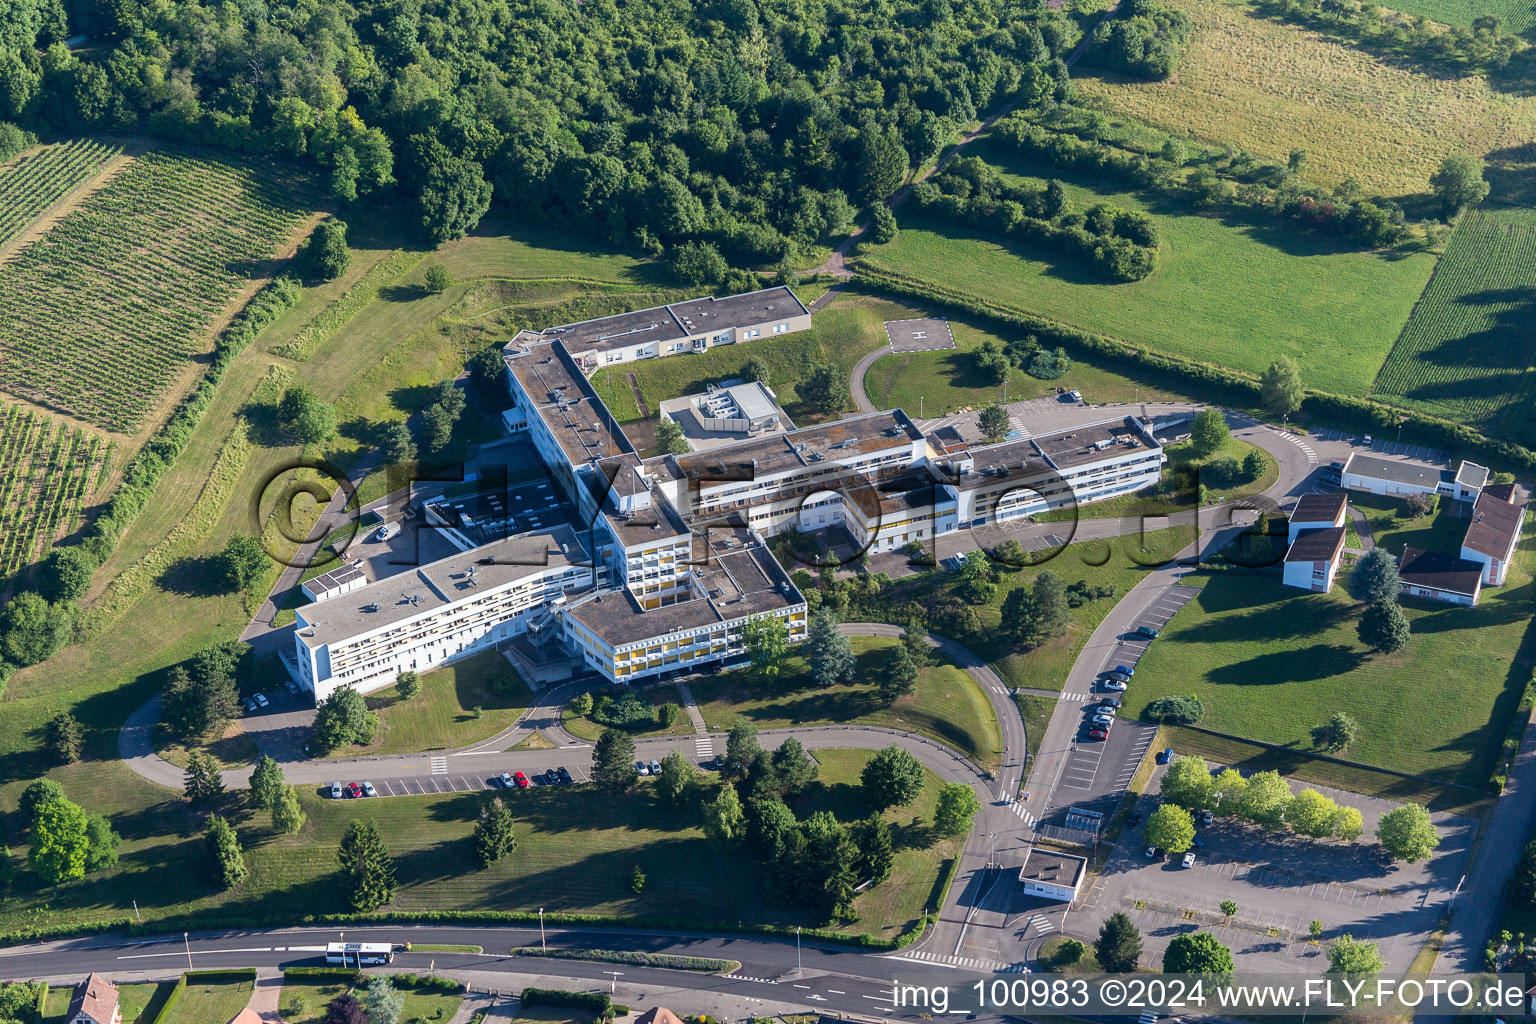 Aerial view of Hospital grounds of the Clinic Centre Hospitalier de la Lauter in Wissembourg in Grand Est, France